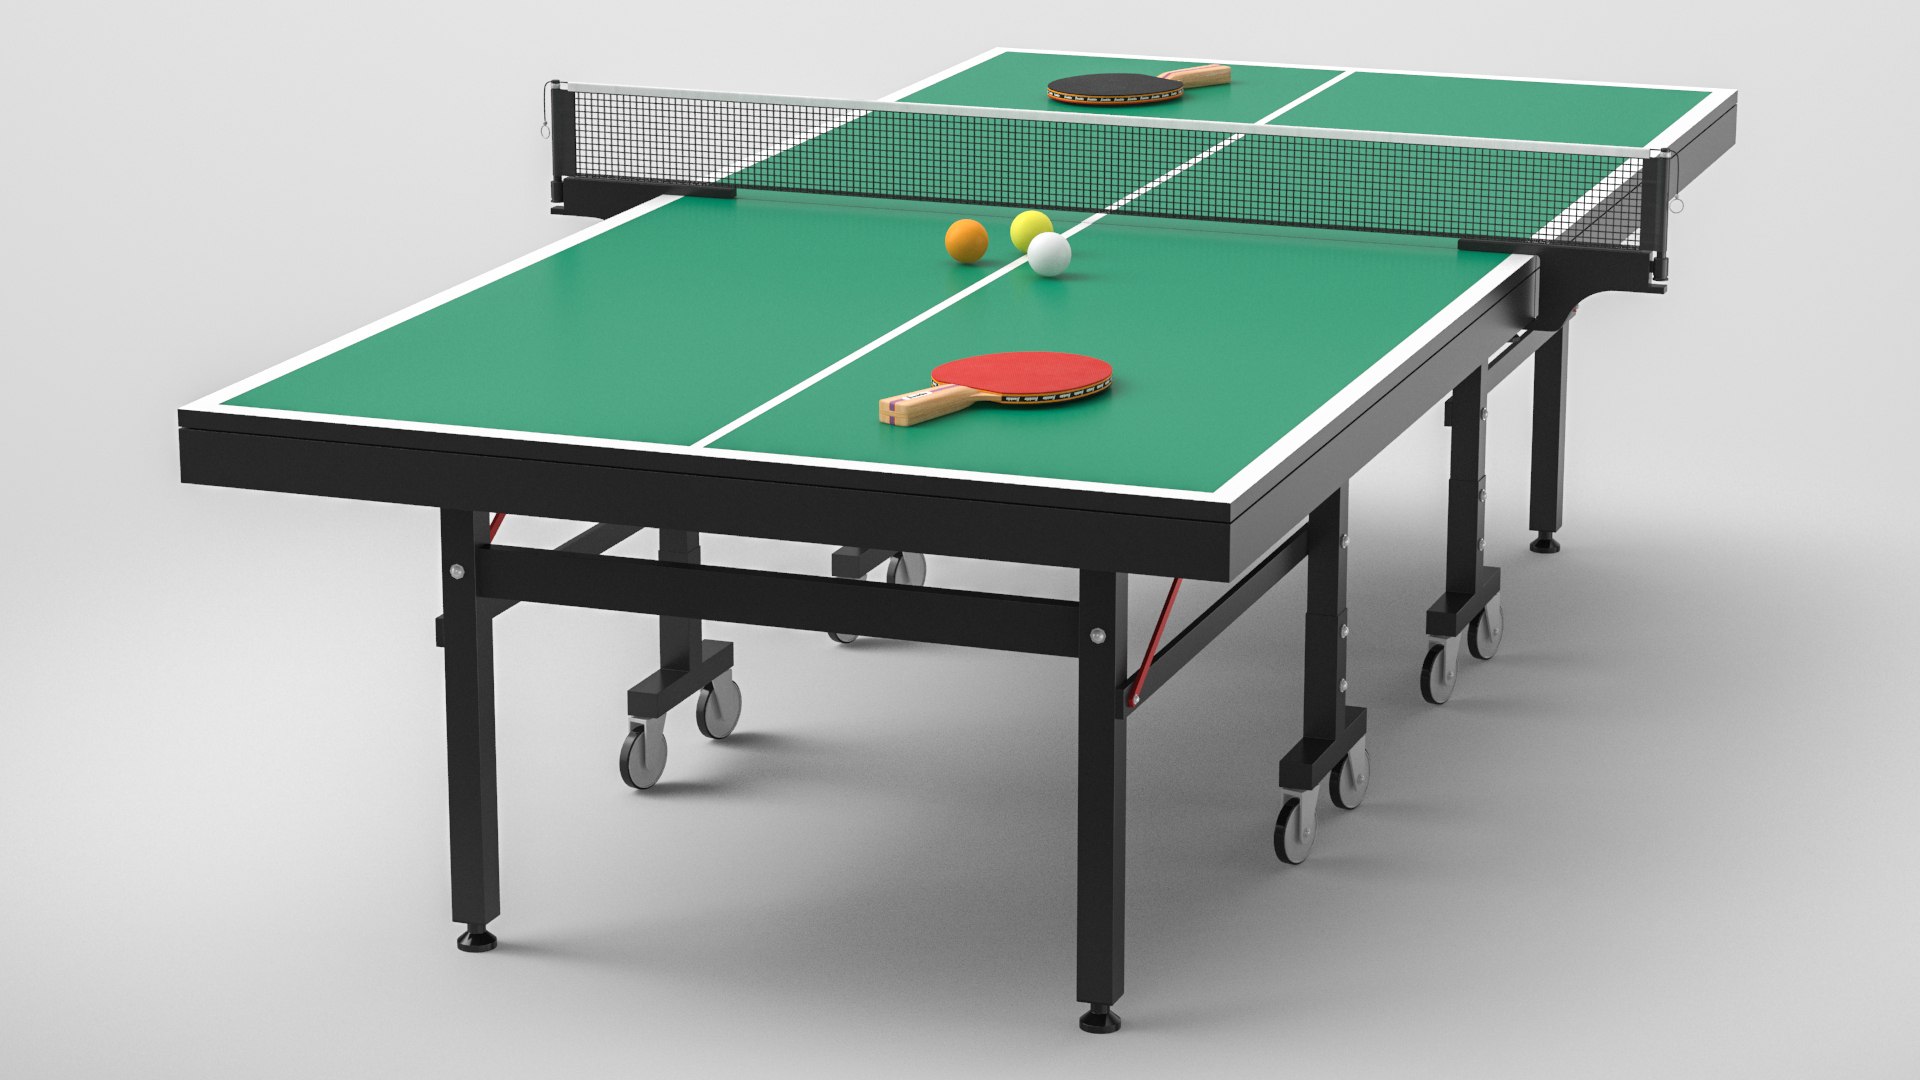 table tennis 3d live ping pong